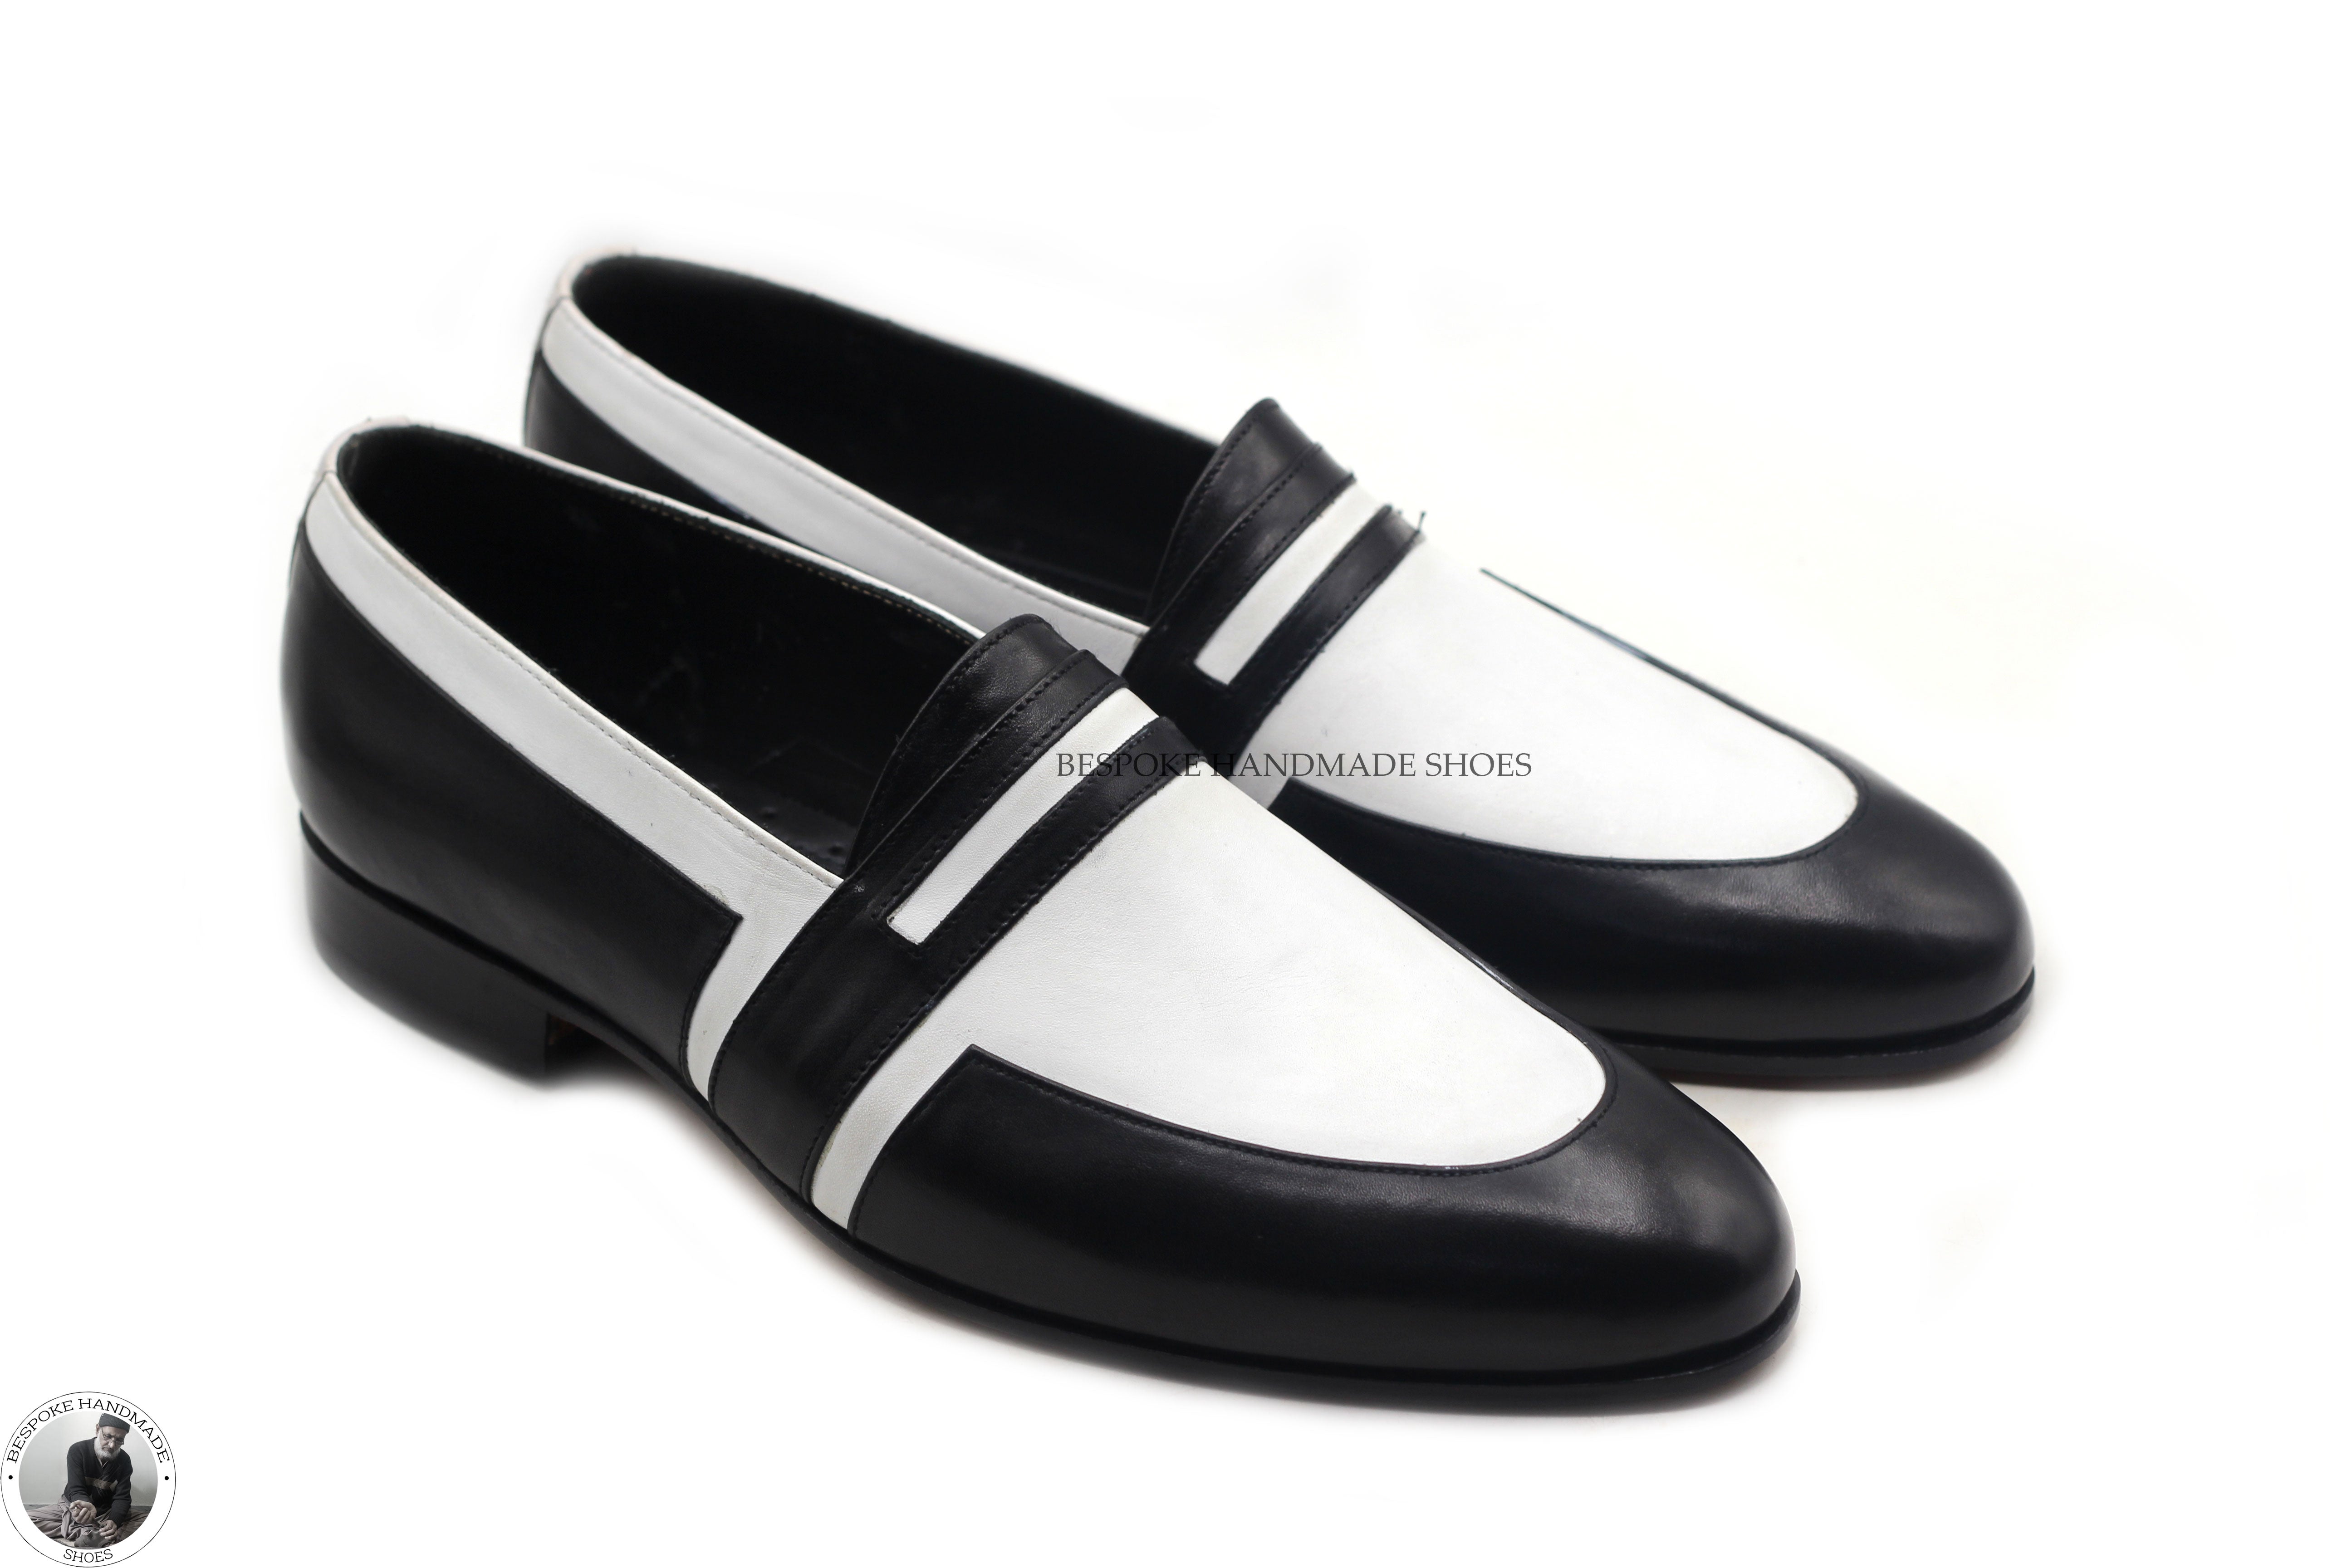 Copy of Handmade Men's White And Black Leather Slip On Moccasin Fashion Shoes For Men's